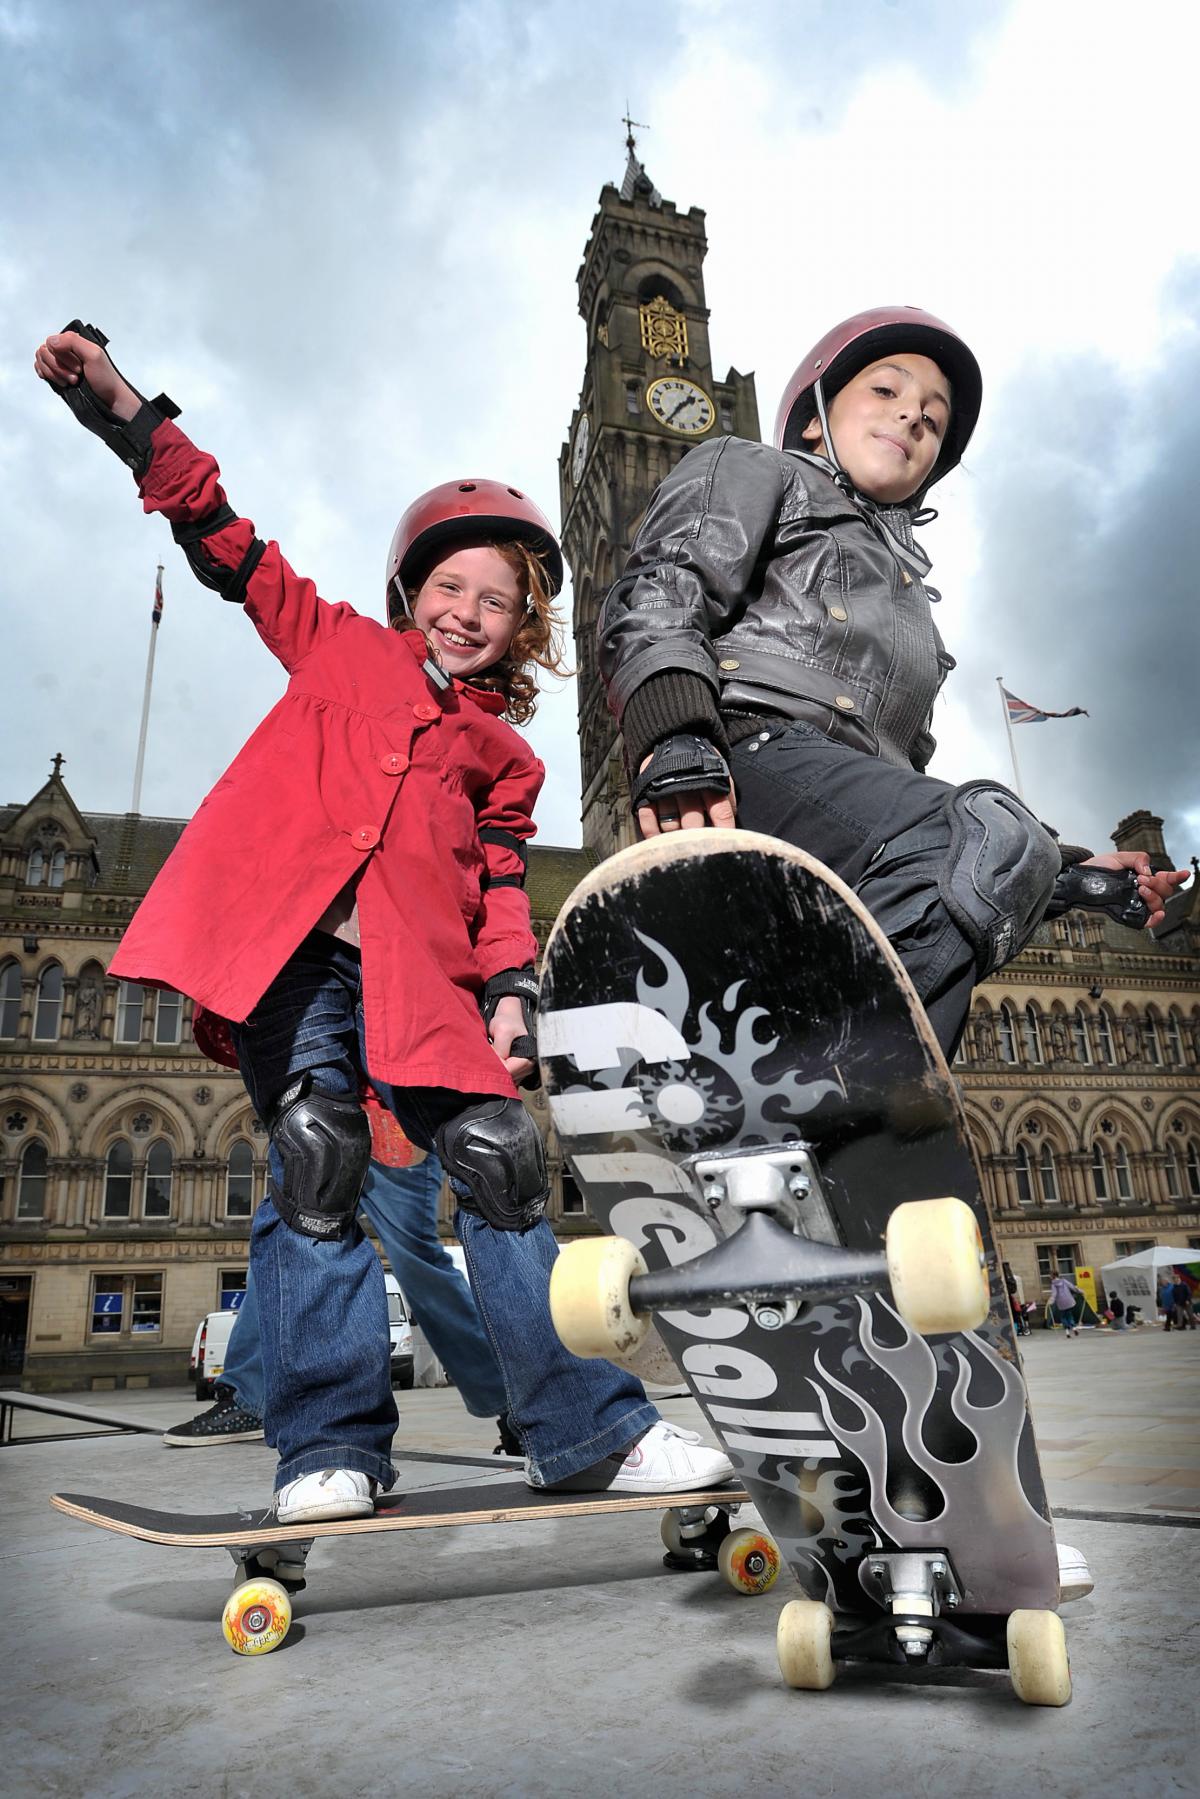 Abby Warden with friend Akenyia Maley on the skateboards at the Big City Play Day in Centenary Square, Bradford